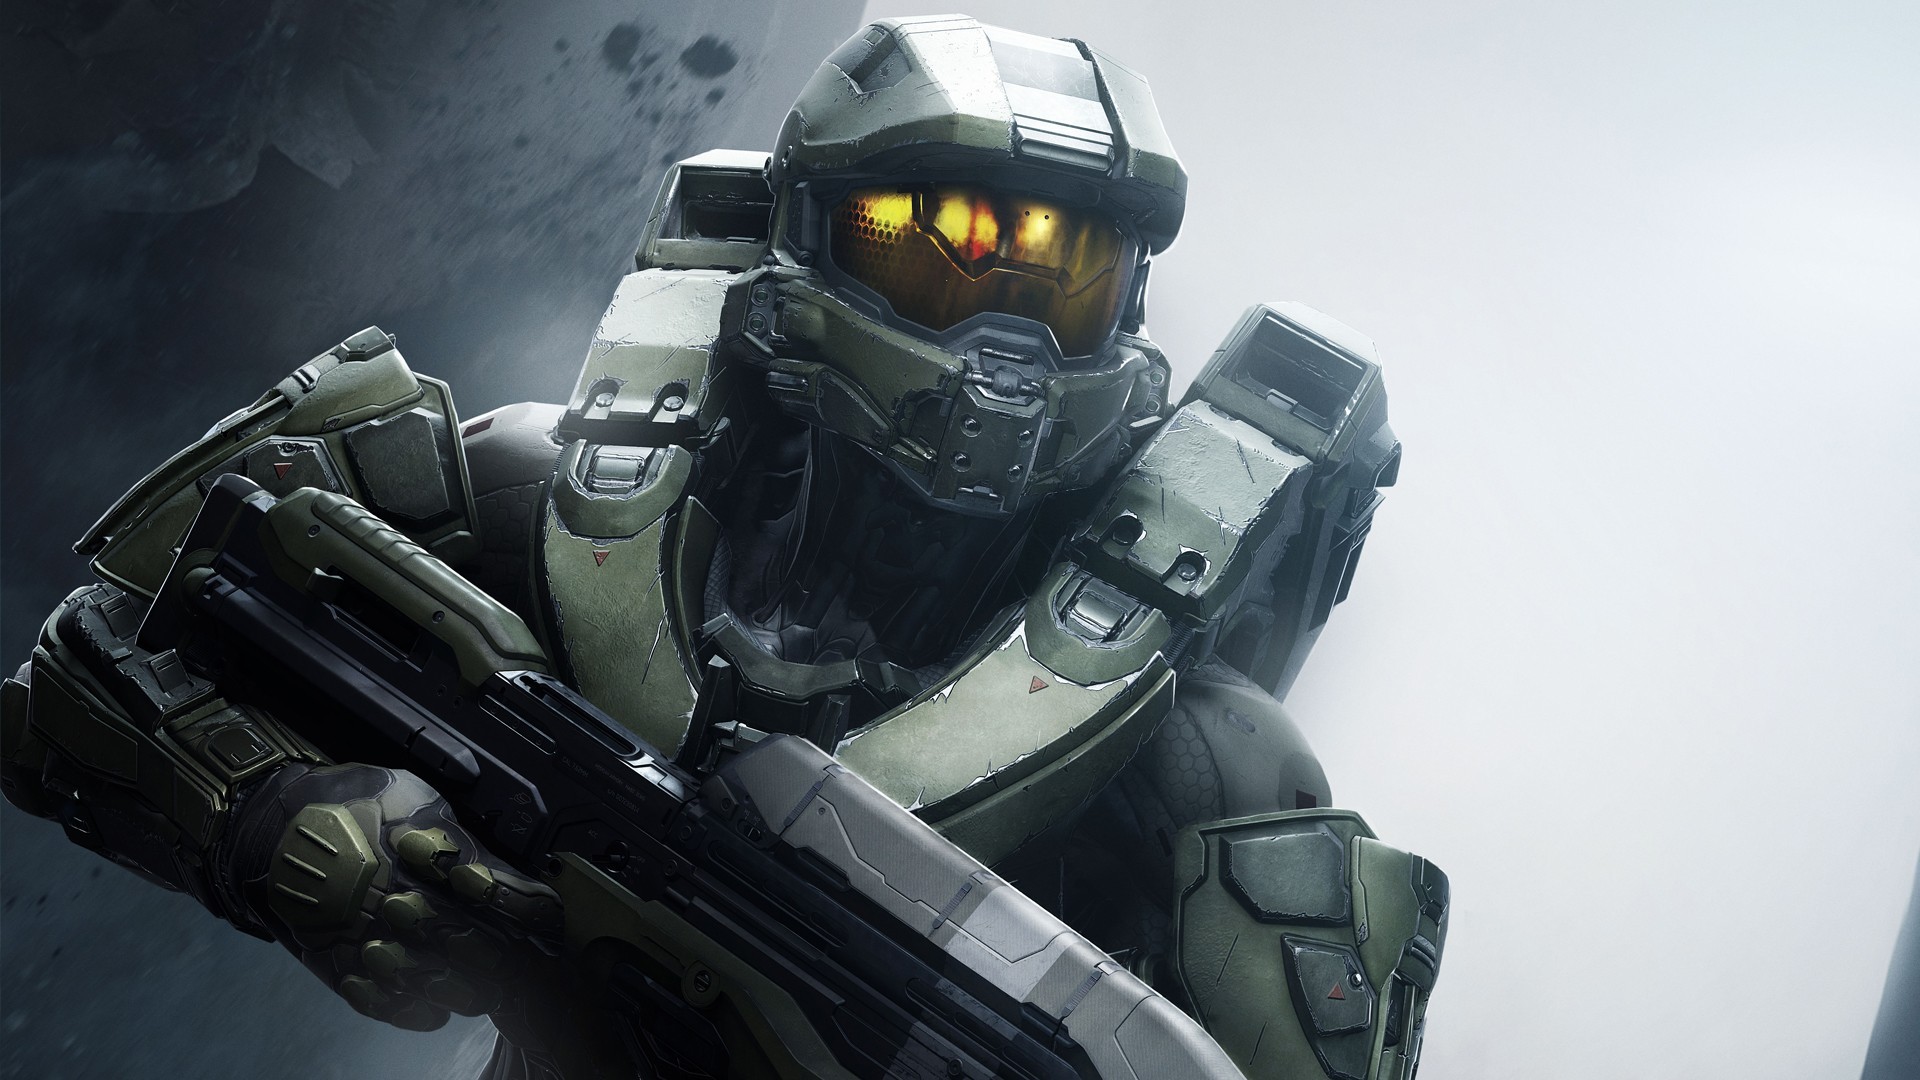 General 1920x1080 video games Halo 5 weapon armor Spartans (Halo) video game art 2015 (Year) Master Chief (Halo) science fiction video game characters Halo (game)